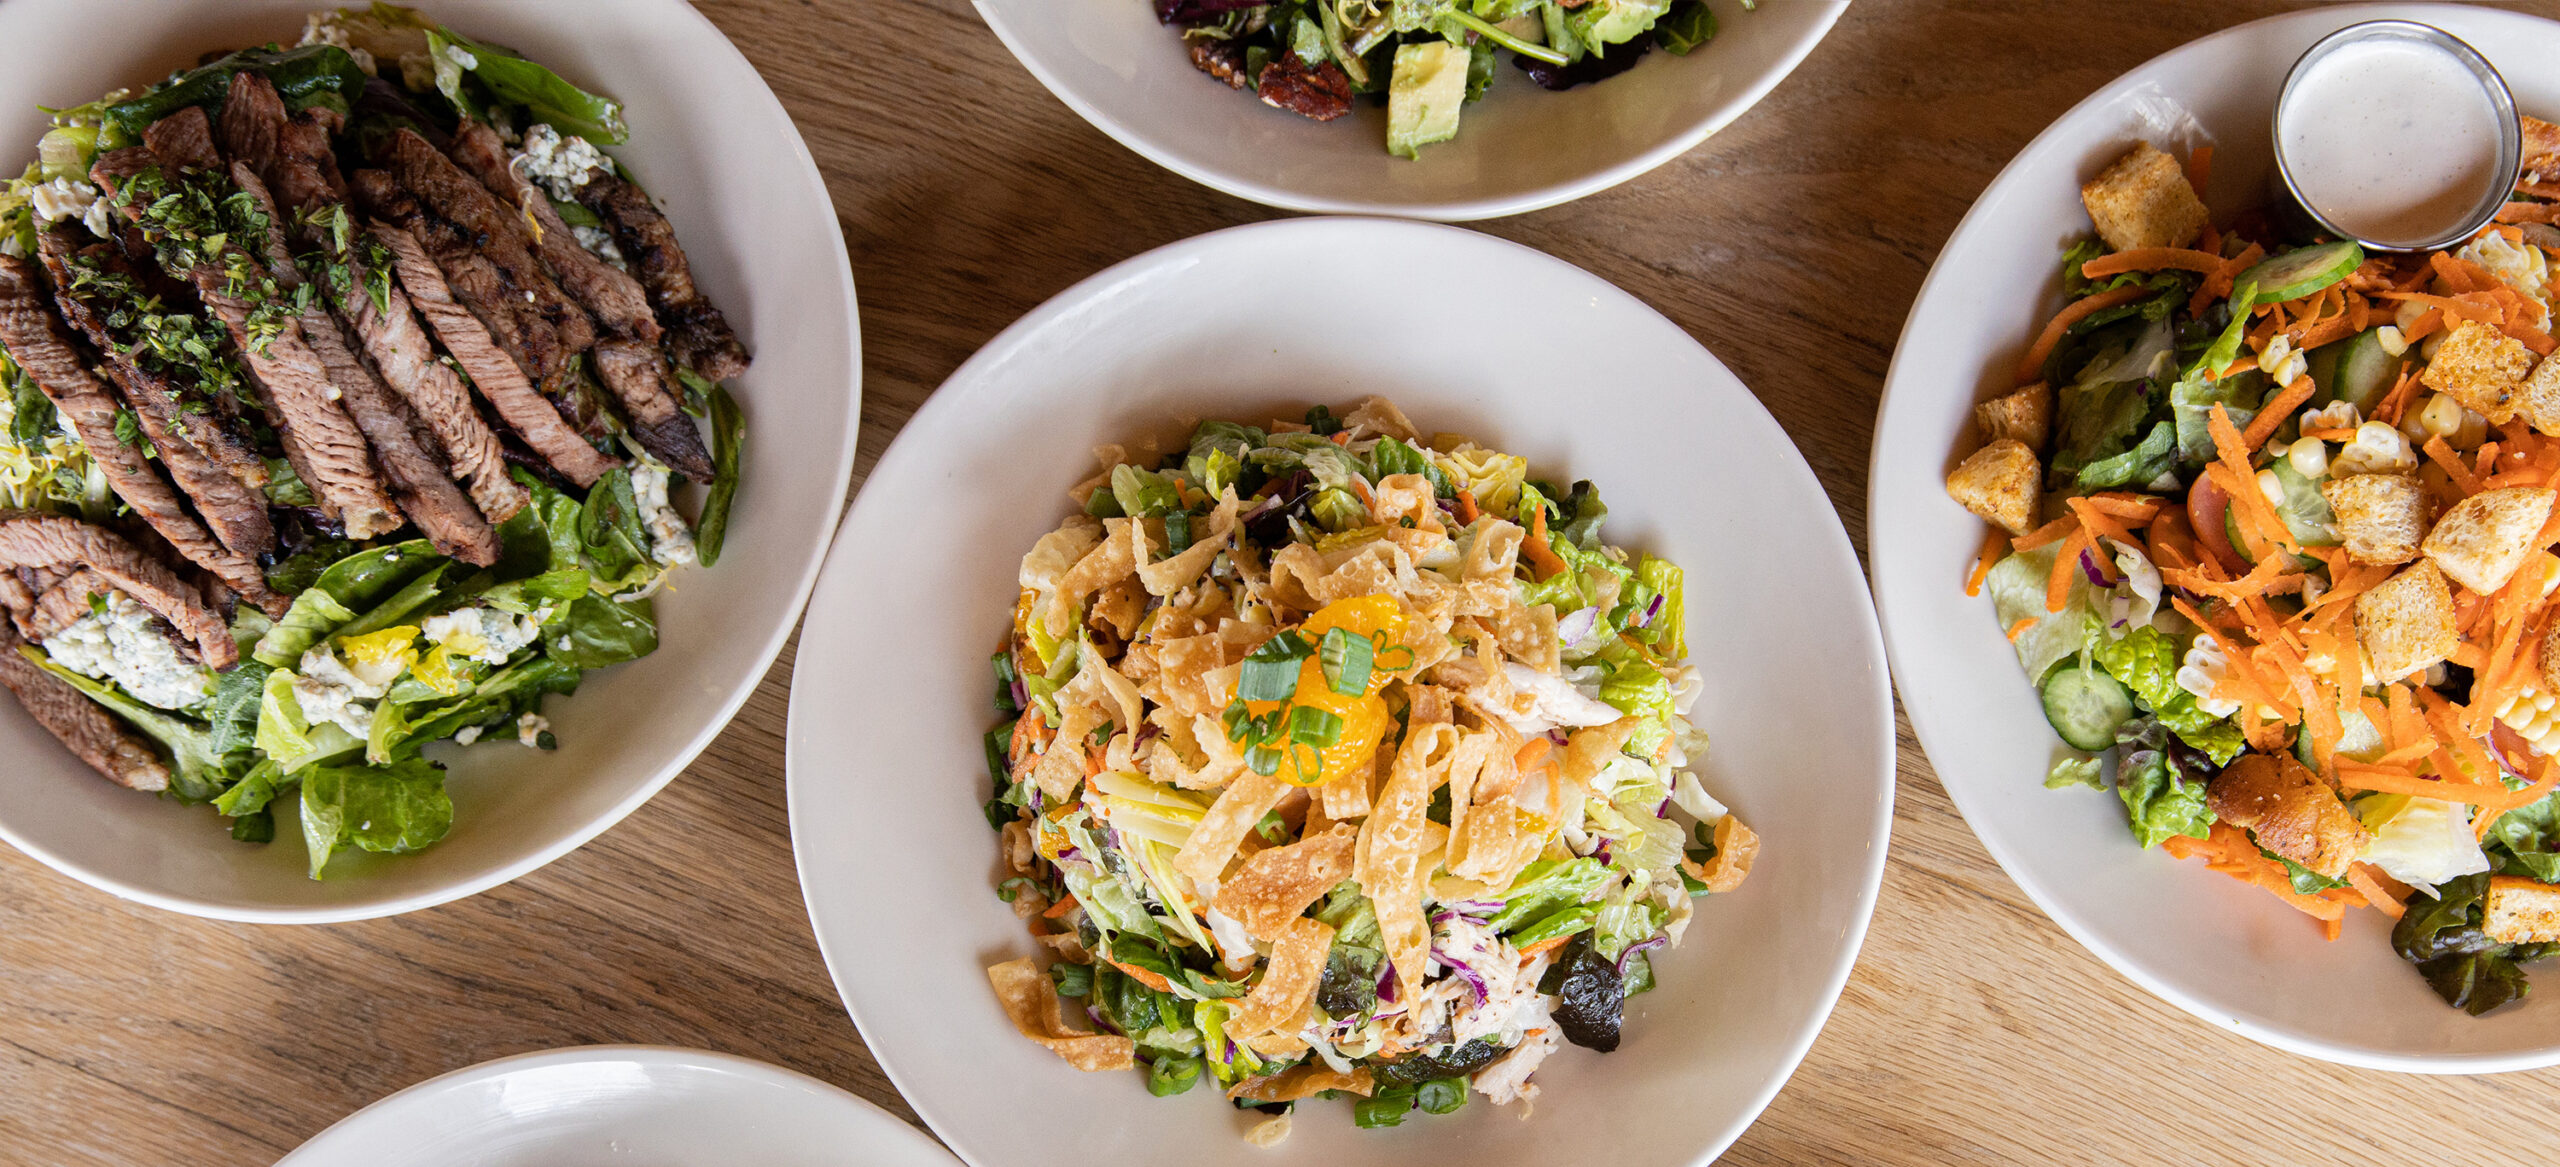 A panoramic image showcasing a variety of salads served on white plates. From left to right: a steak salad with sliced beef and greens, a colorful Asian chicken salad with mandarin oranges and crispy noodles, and a garden salad topped with croutons and shredded carrots.